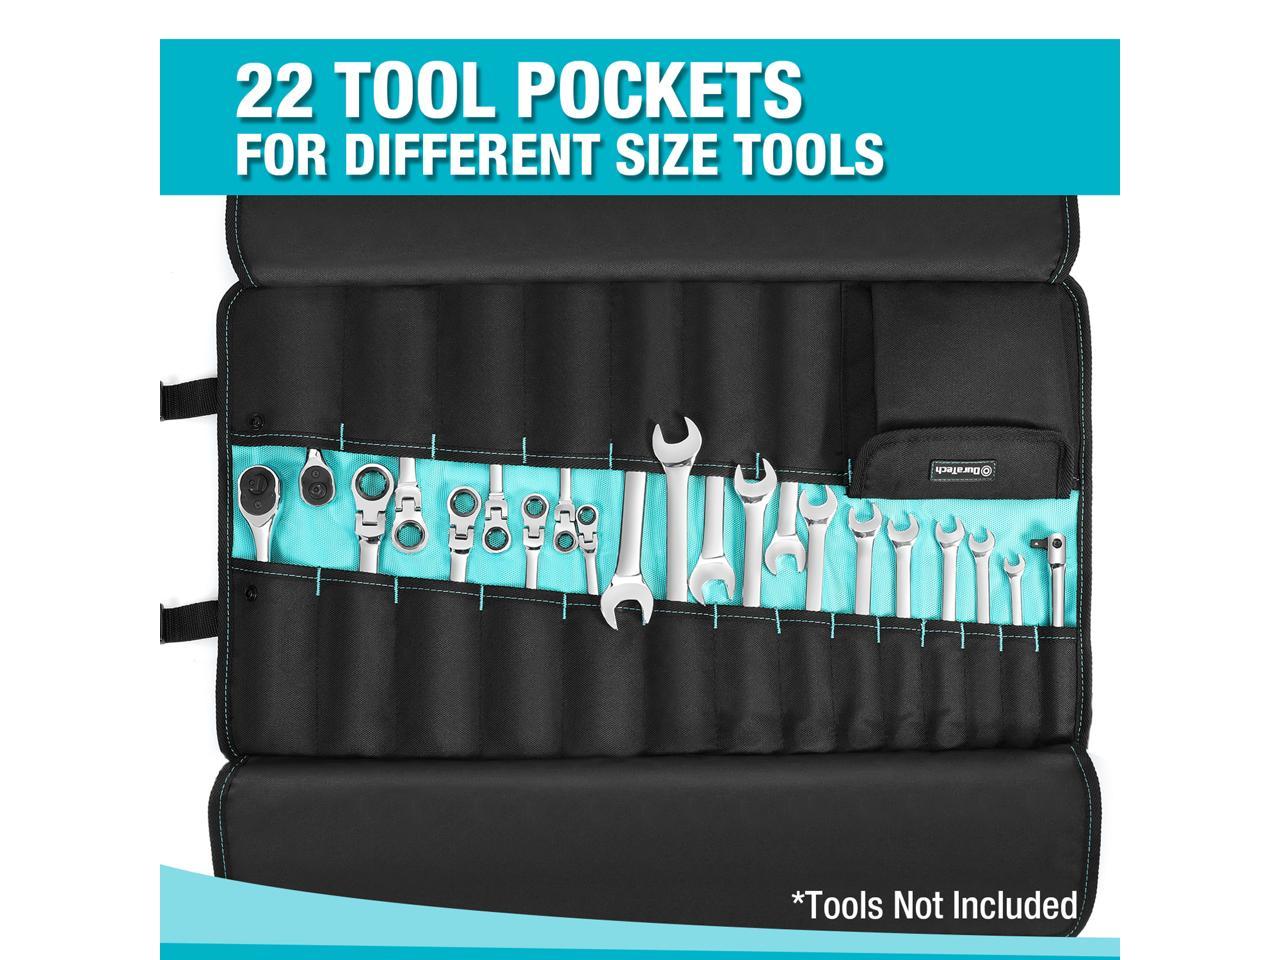 22 Pockets DURATECH Tool Pouch / Wrench Organizer without Tools Premium Waterproof Oxford Cloth Made Tool Roll Bag for Electrician Carpenter Mechanics 24.4” x 14.2” 